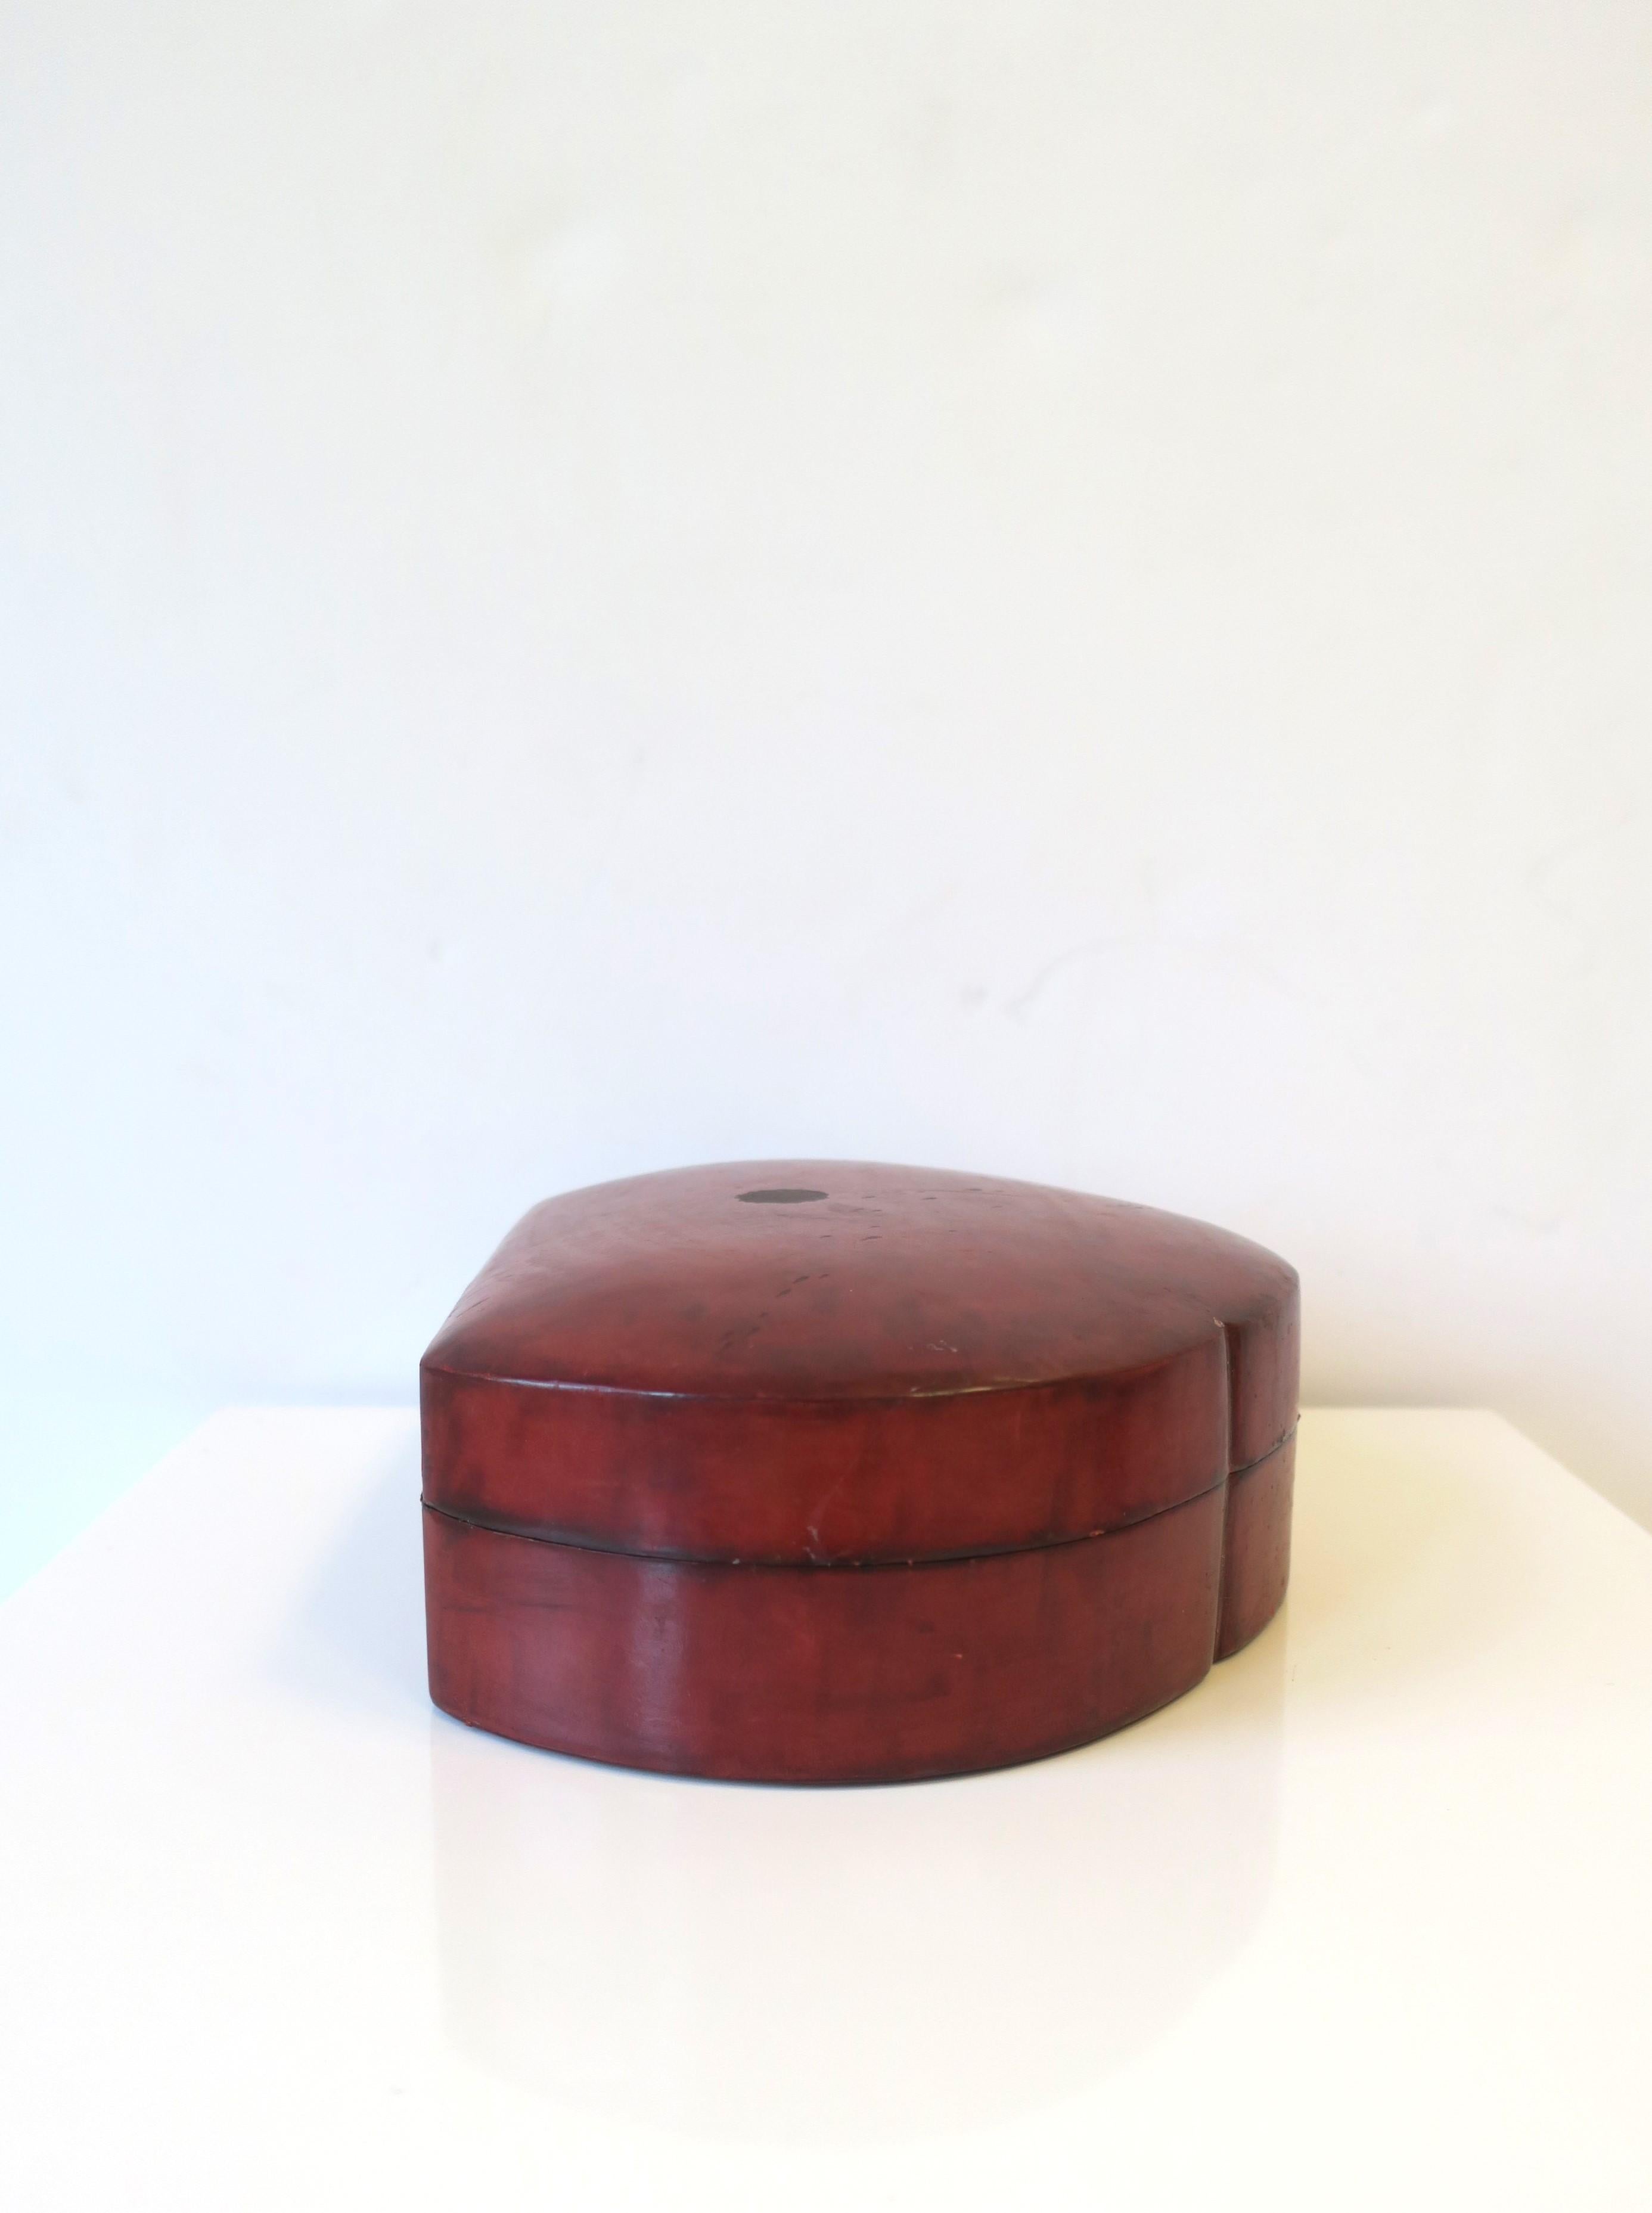 Italian Leather Jewelry Box with Scalloped Design For Sale 3